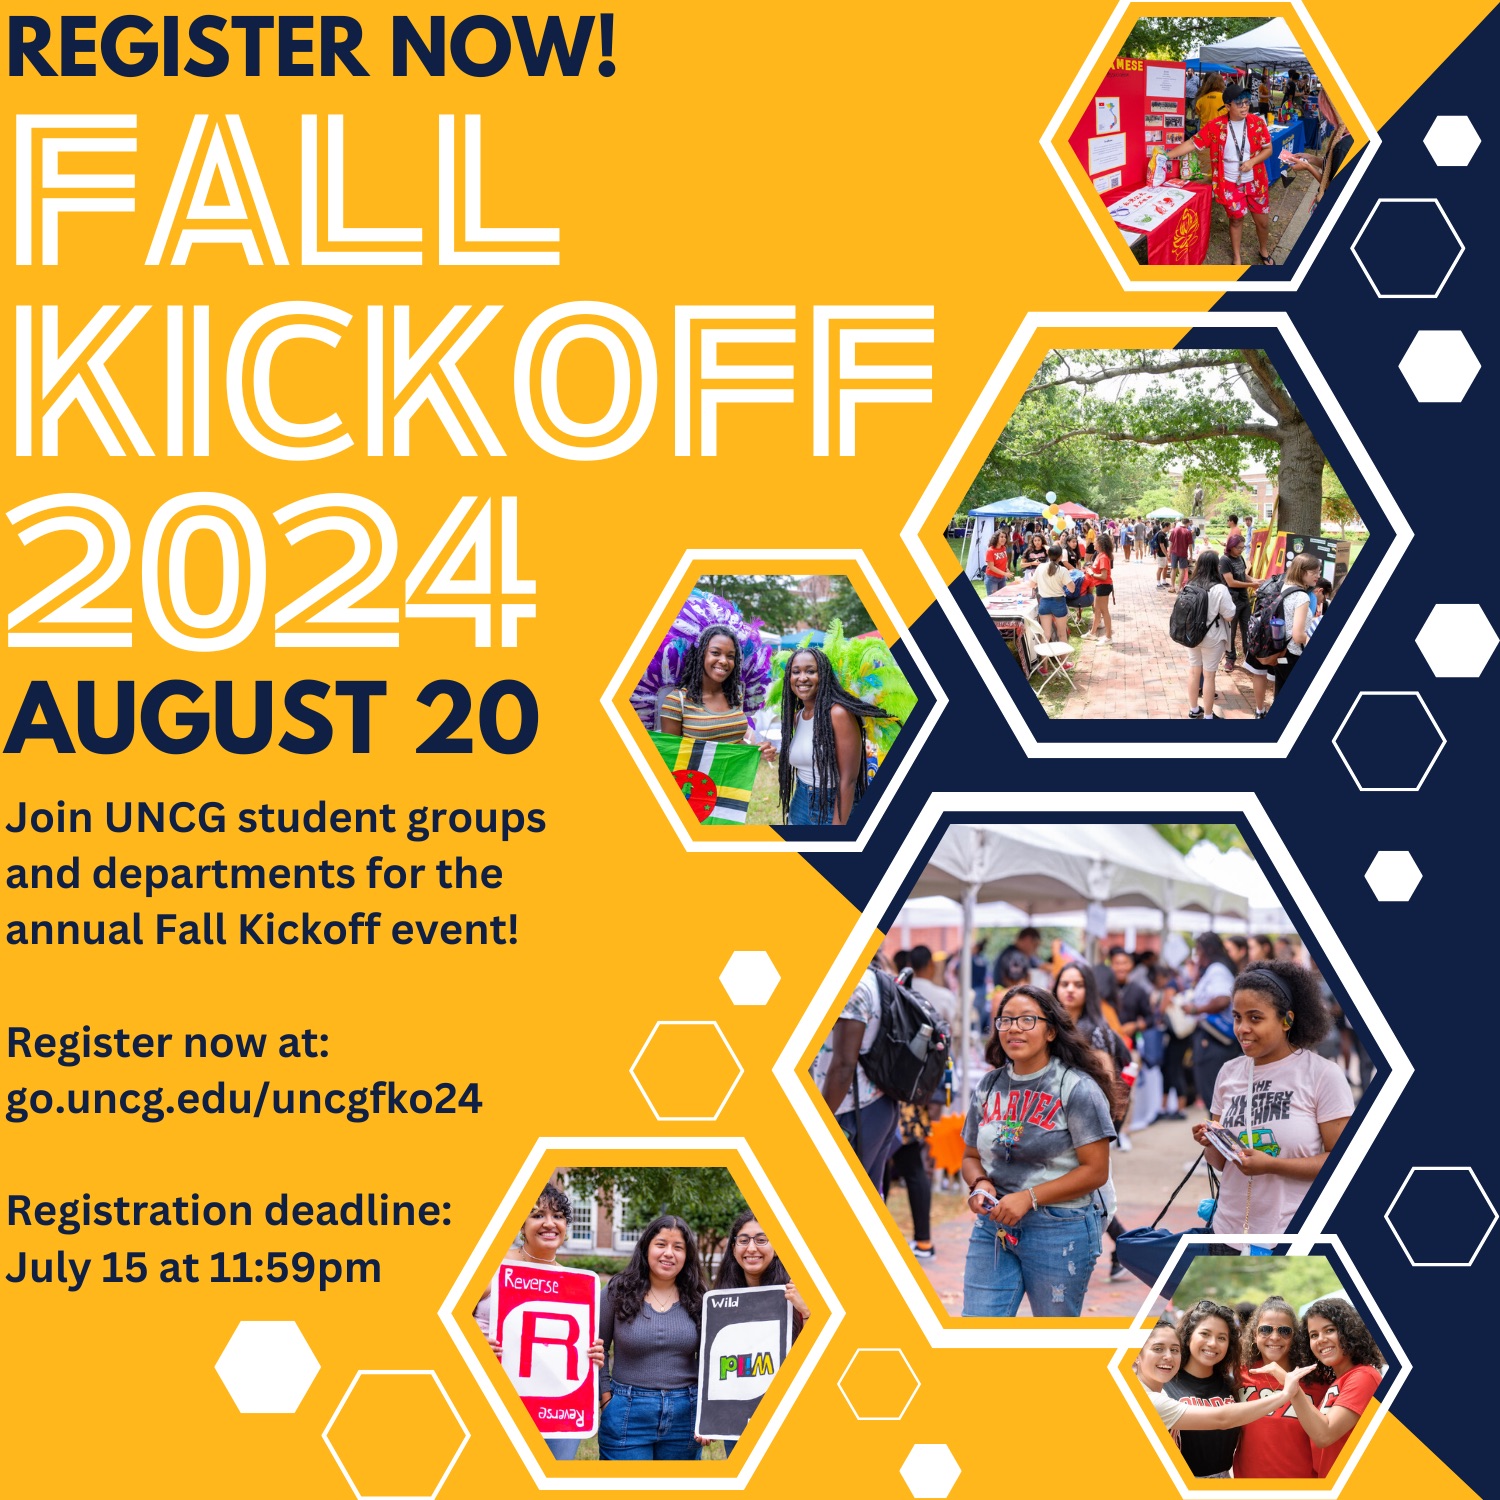 Poster for UNCG Fall Kickoff to be held on August 20.